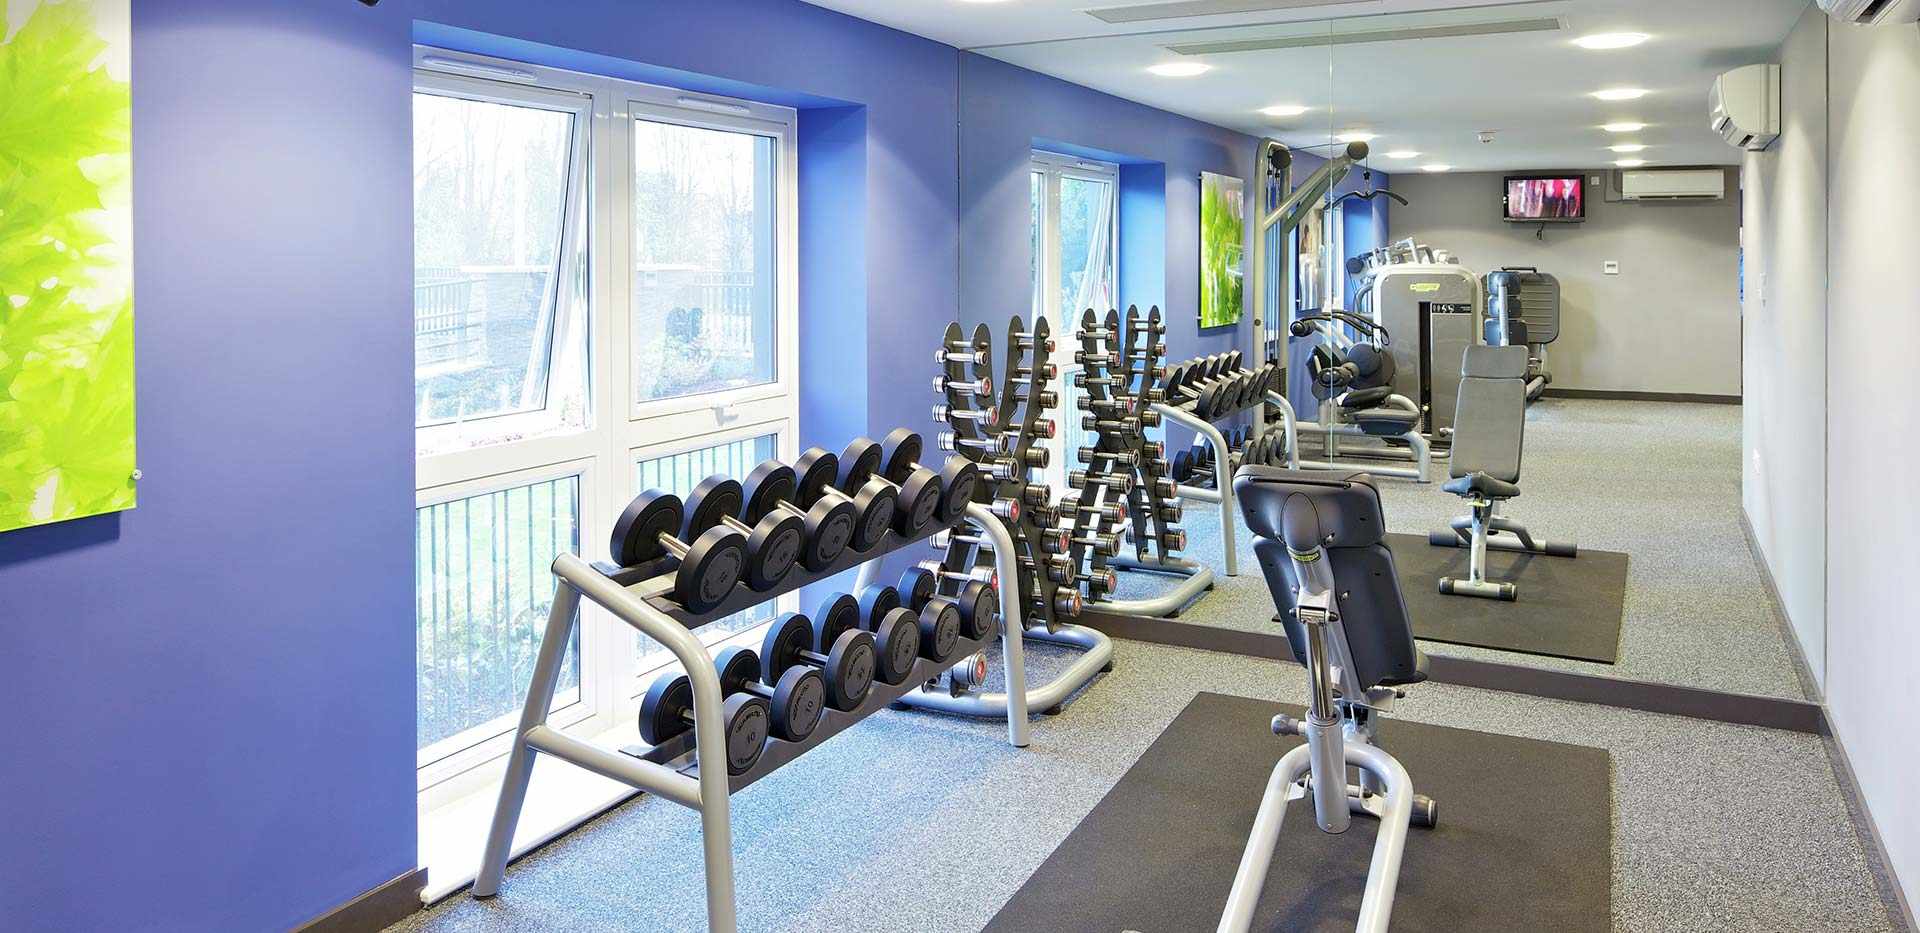 St Edward, Stanmore Place, Residents Only Gym, Equipment, Residents Facilities